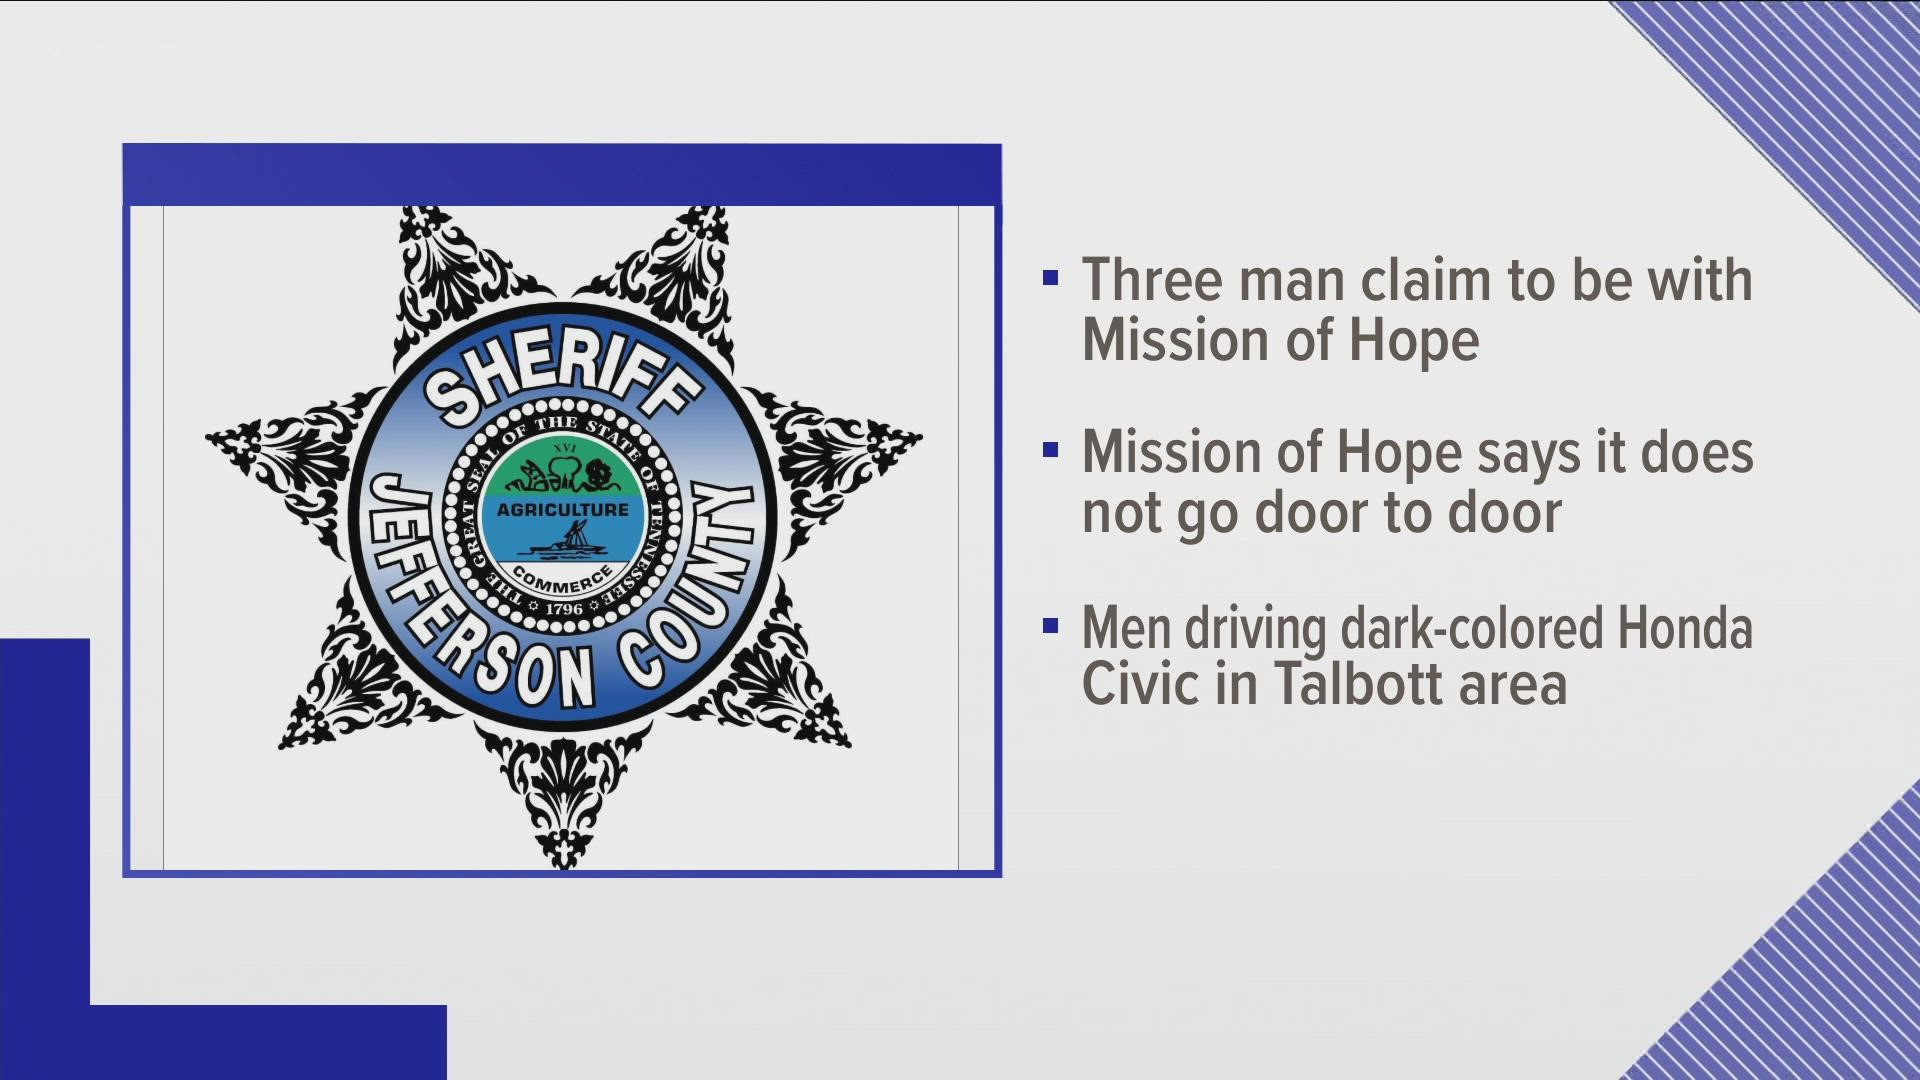 Mission of Hope does not solicit door-to-door. However, police said three men are asking for money in Jefferson County, pretending to collect money for them.